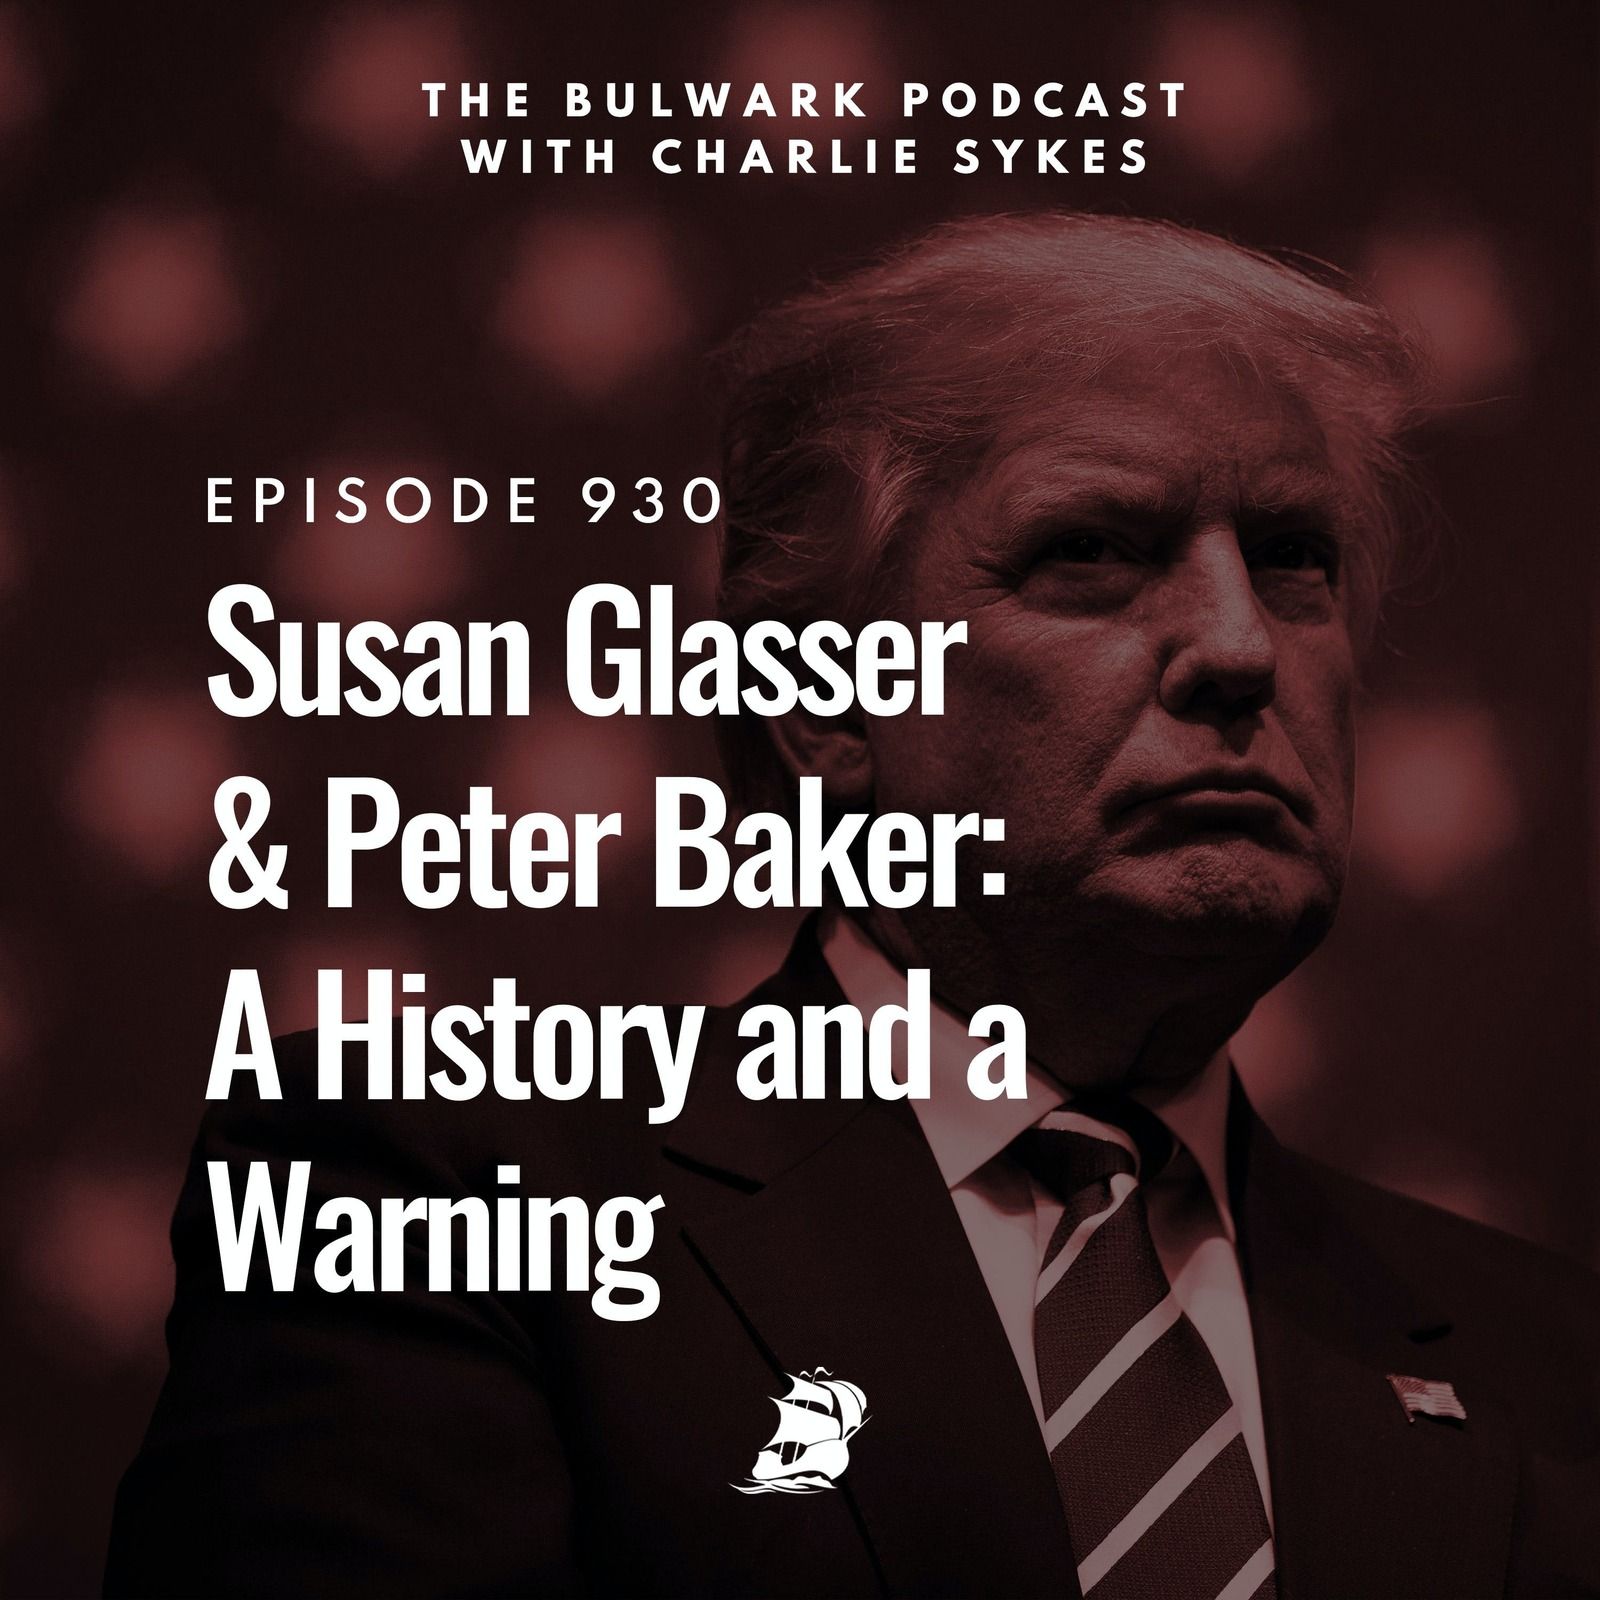 Susan Glasser & Peter Baker: A History and a Warning